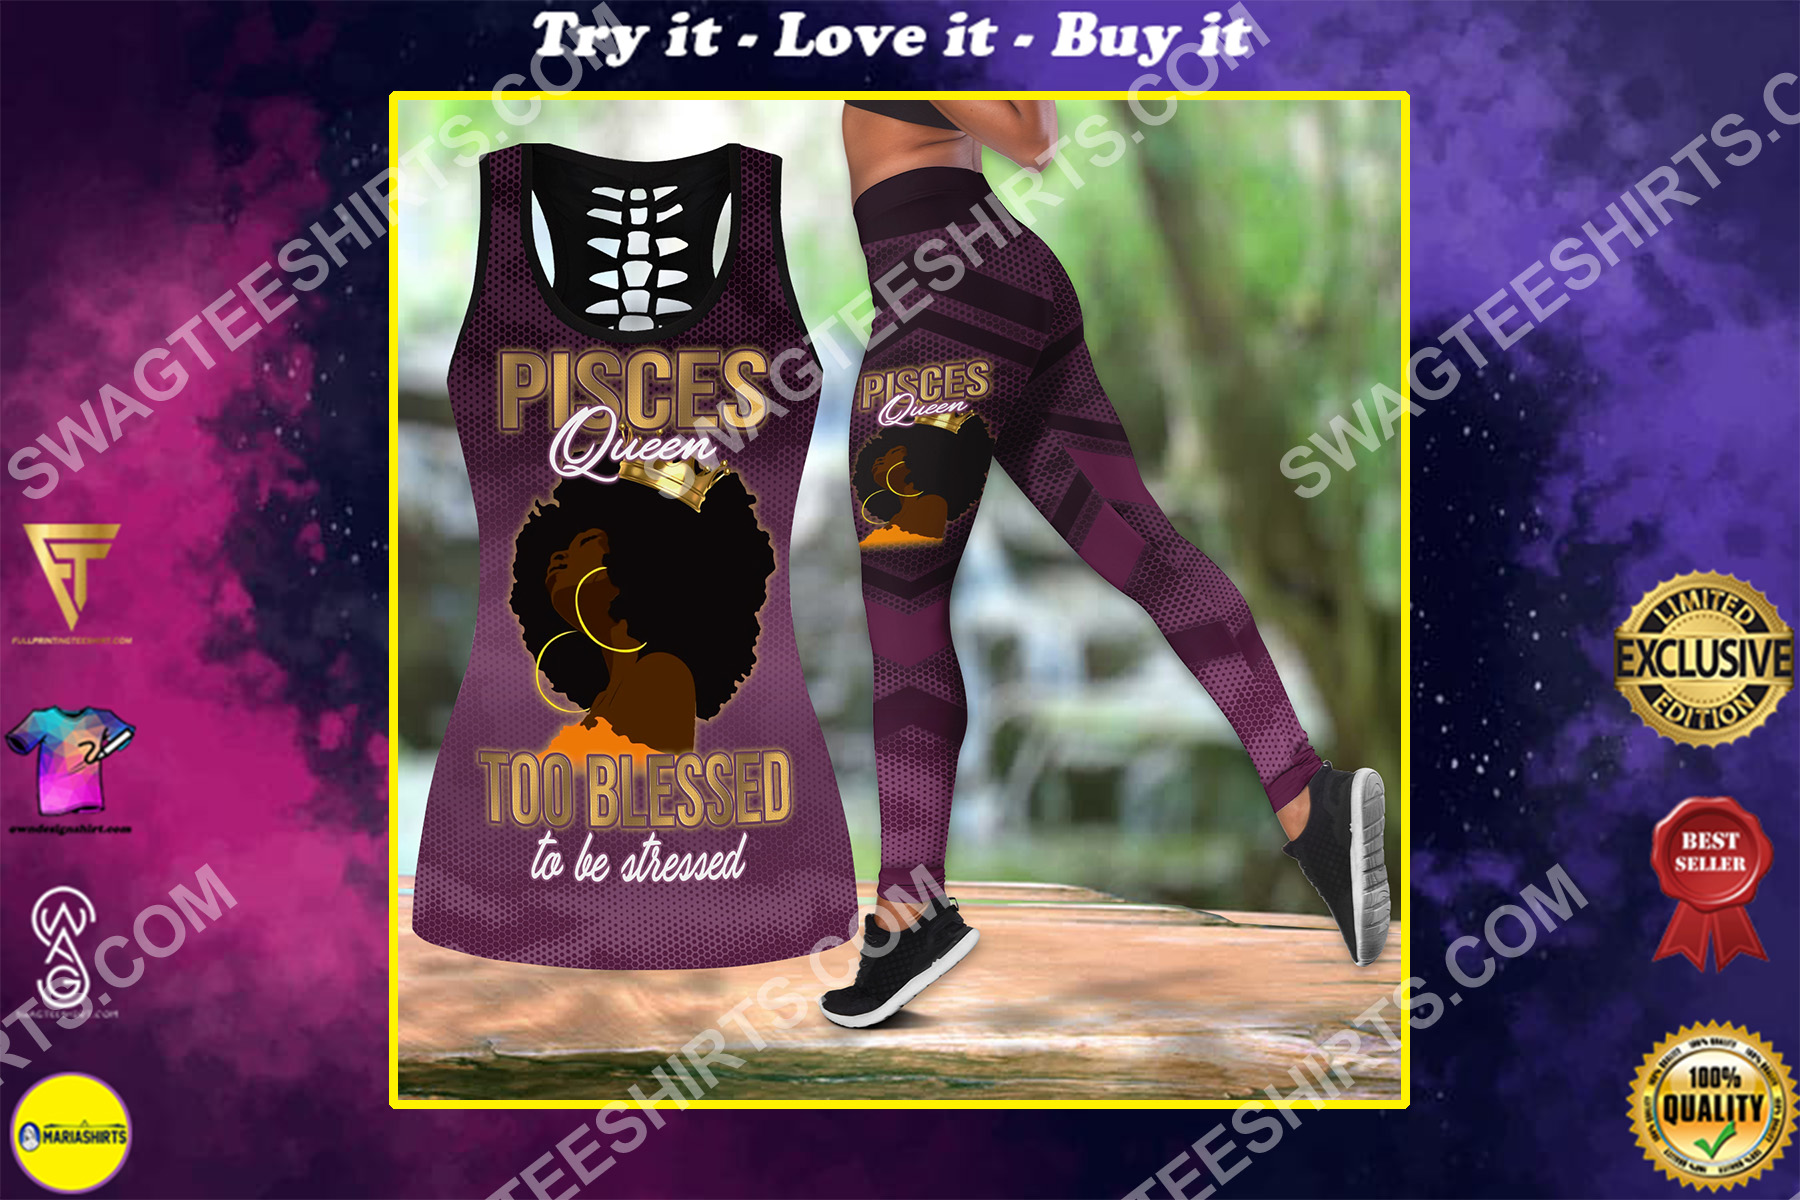 pisces queen too blessed to be stressed birthday gift set sports outfit